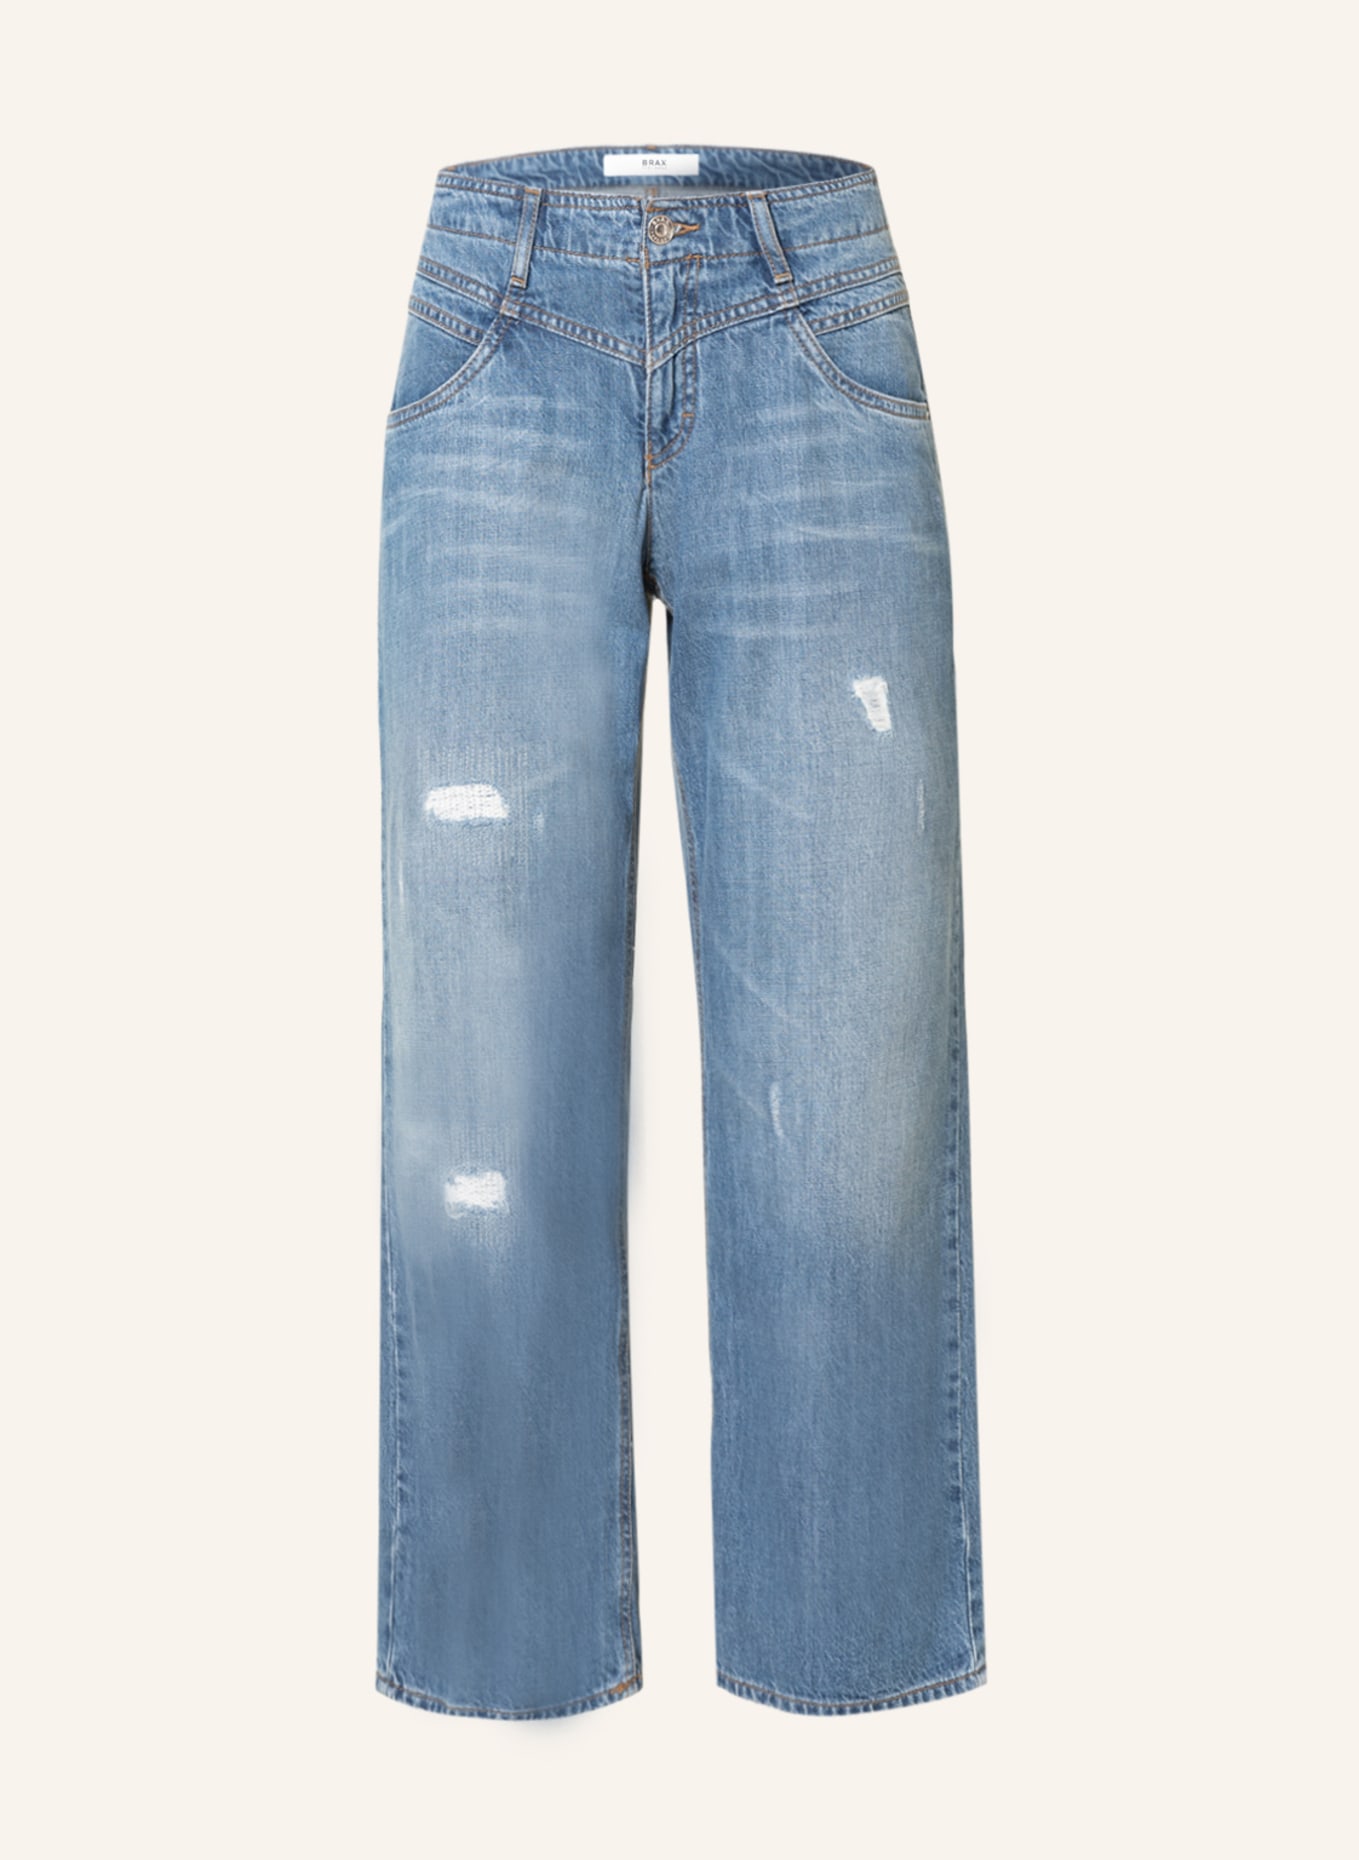 BRAX Jeans-Culotte MAINE, Farbe: 26 USED DESTROYED BLUE (Bild 1)